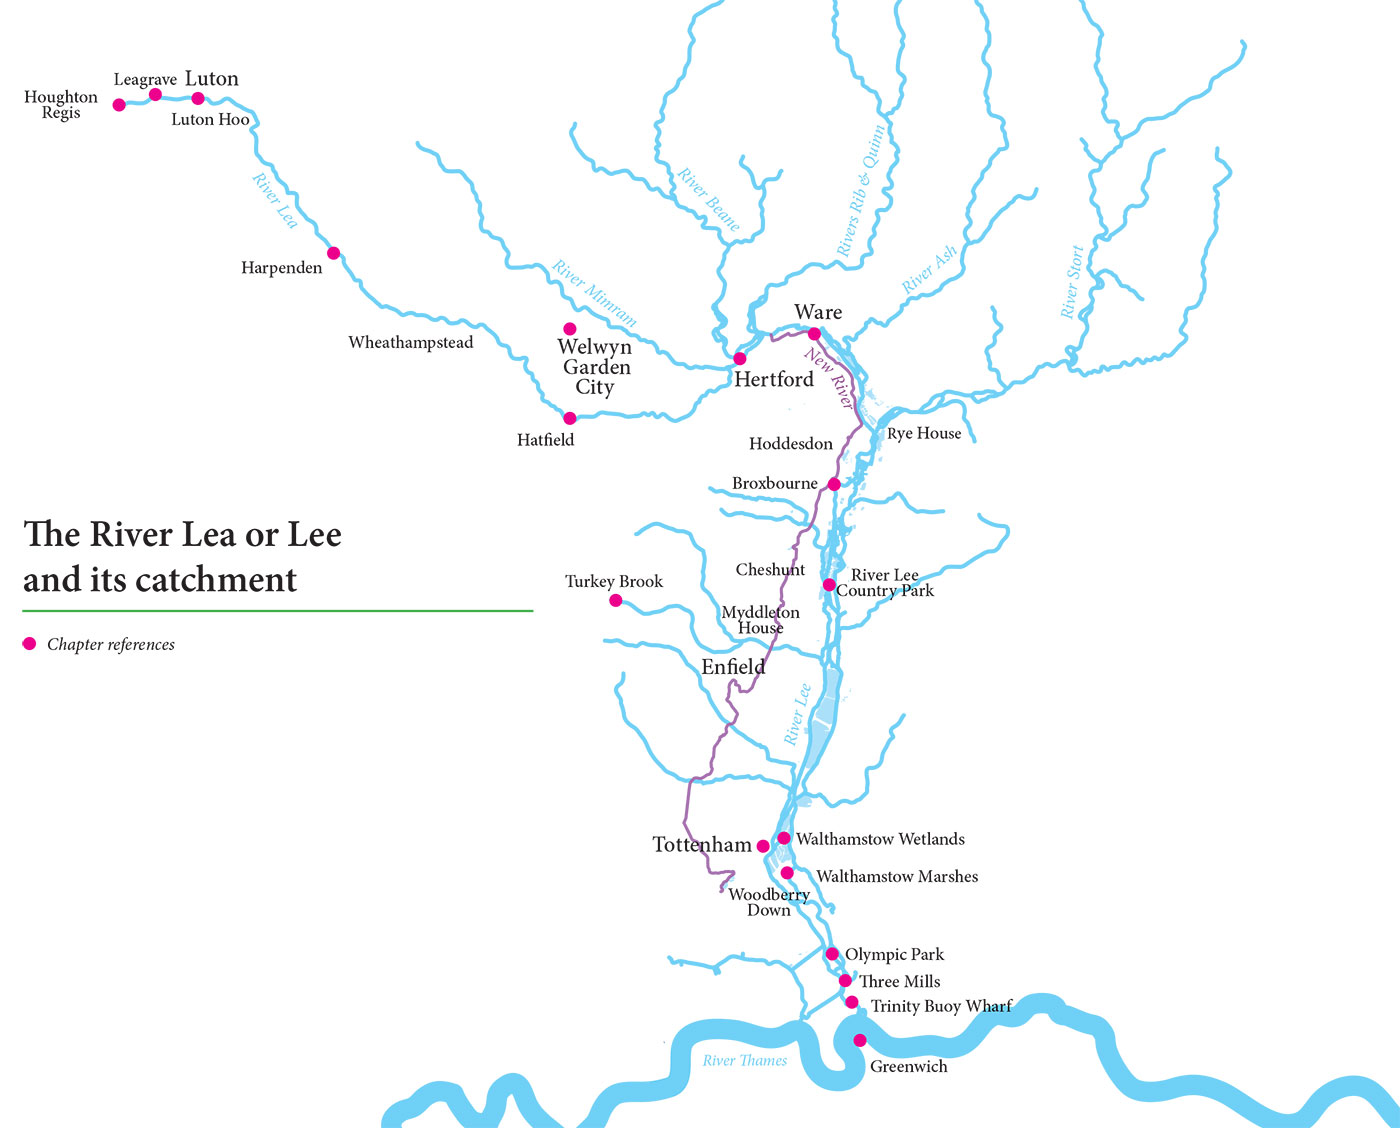 The River Lea or Lee and its catchment